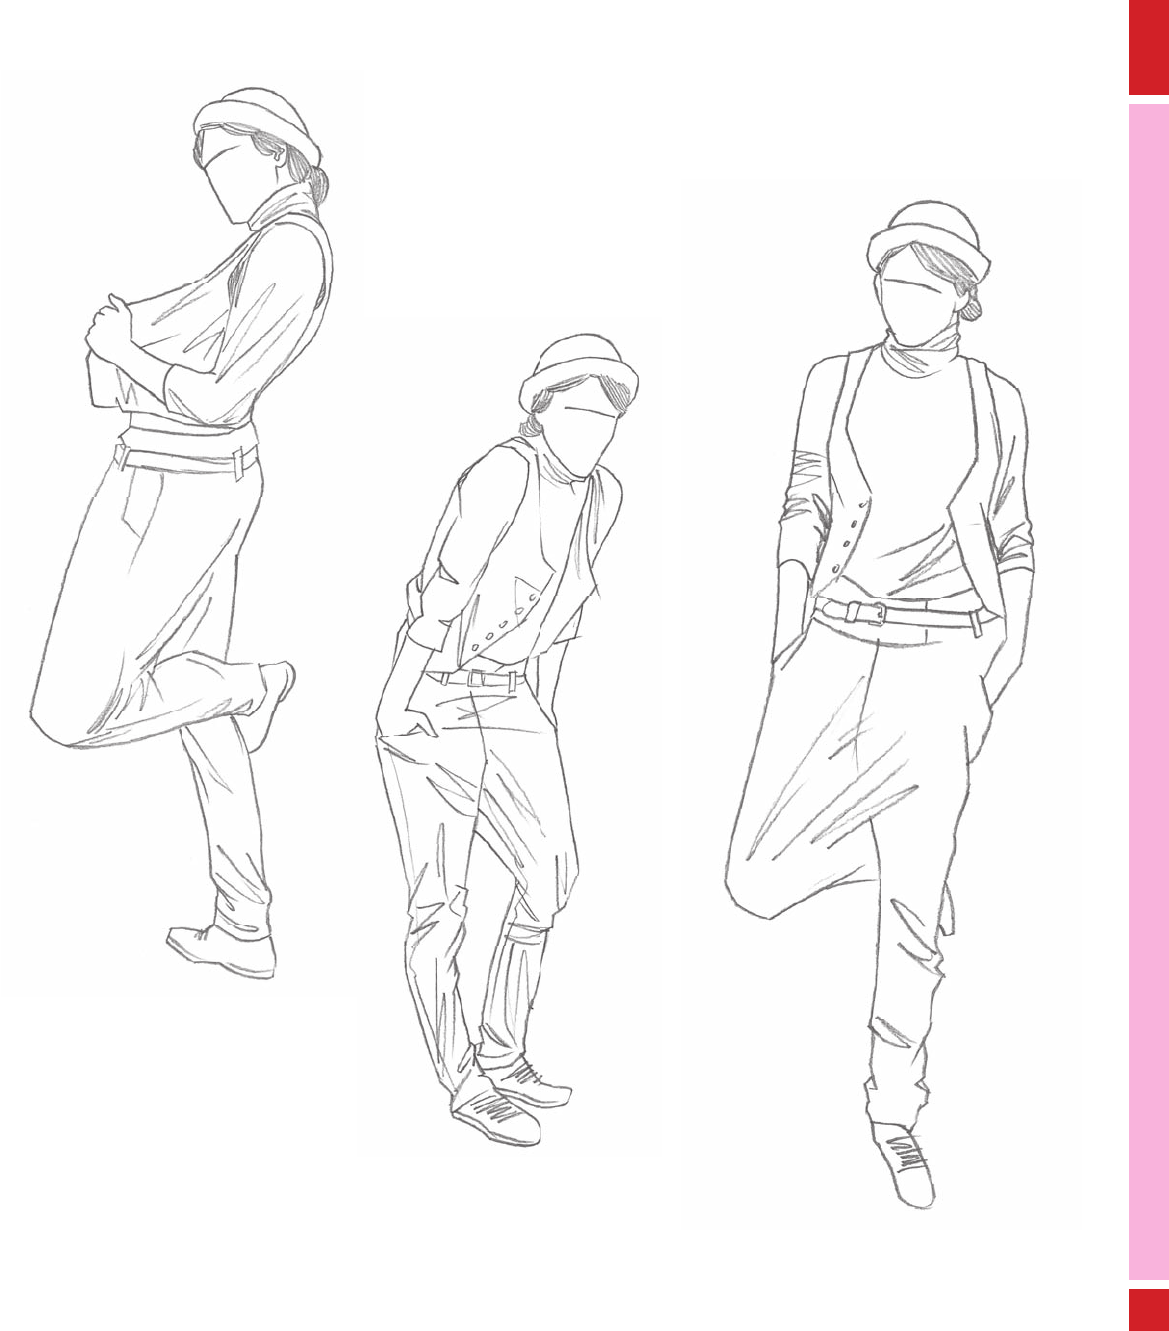 Turtleneck sweater, tuxedo vest, and baggy pants - 1,000 Poses in